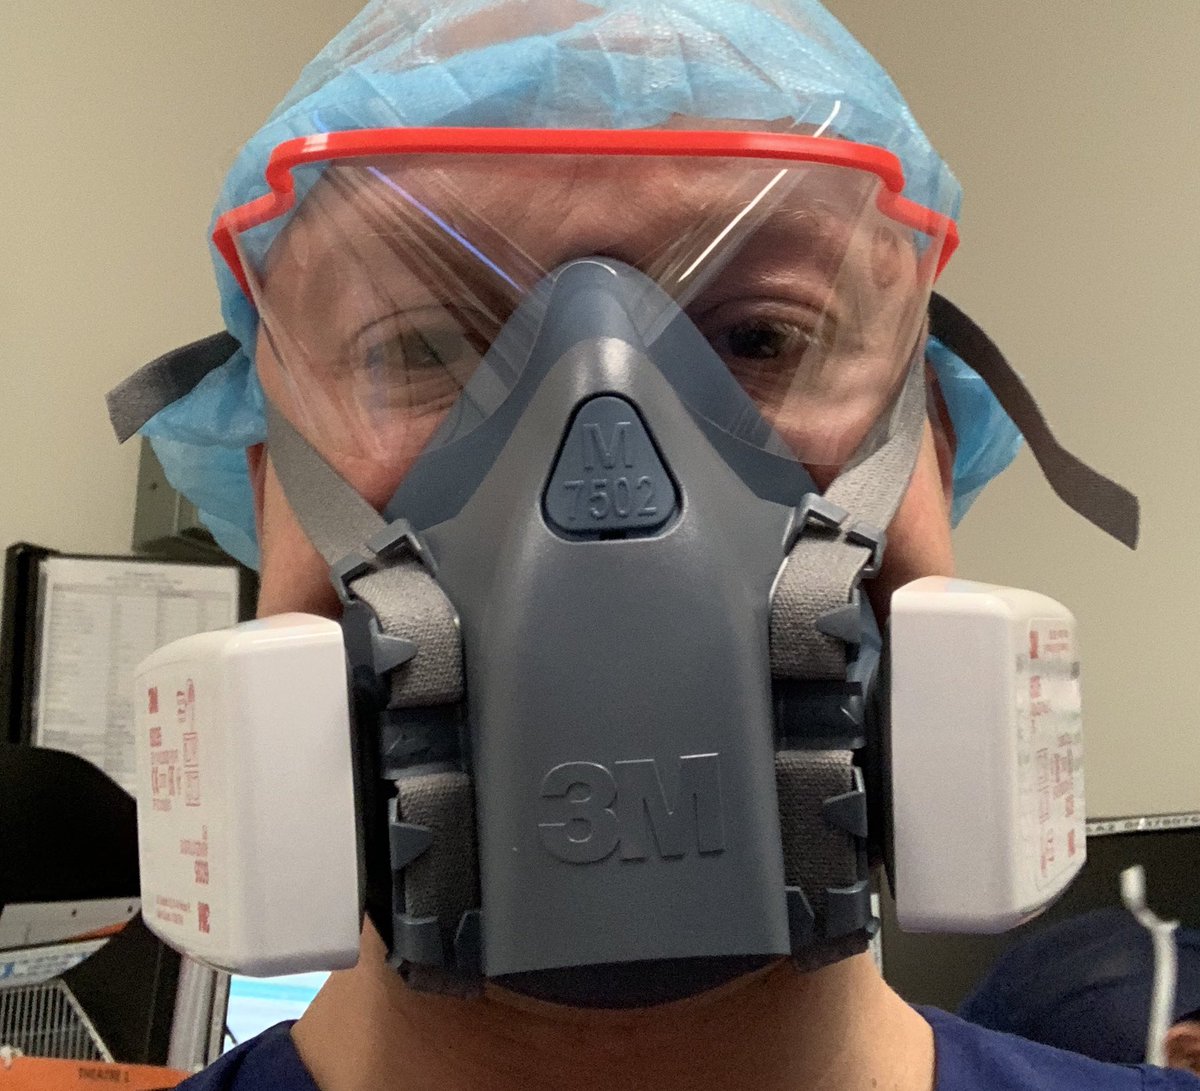 The 3M half face respirators (7500) have two filters, one positioned either side of the expiratory valve in front. Expiratory breath is channeled downwards.The shorter forward profile means these work better with most face shields.